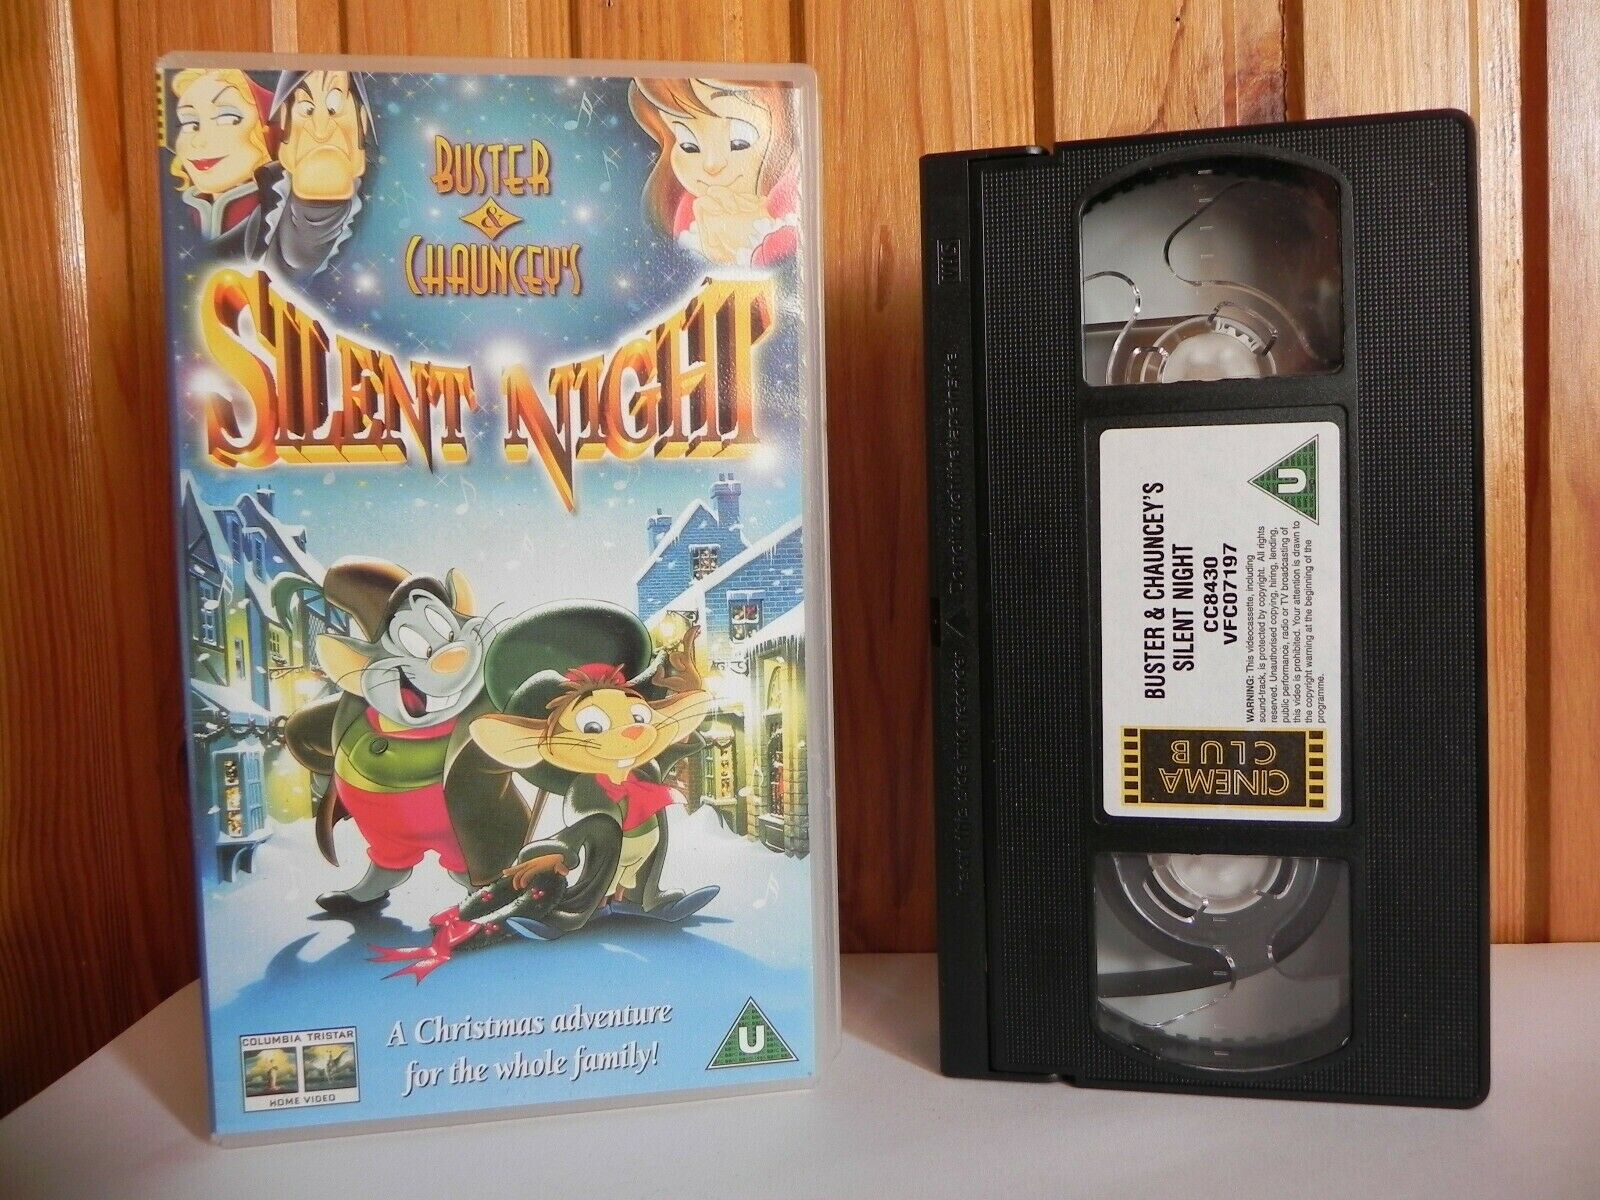 Buster And Chauncey's Silent Night - Animated - Christmas Adventure - Kids - VHS-